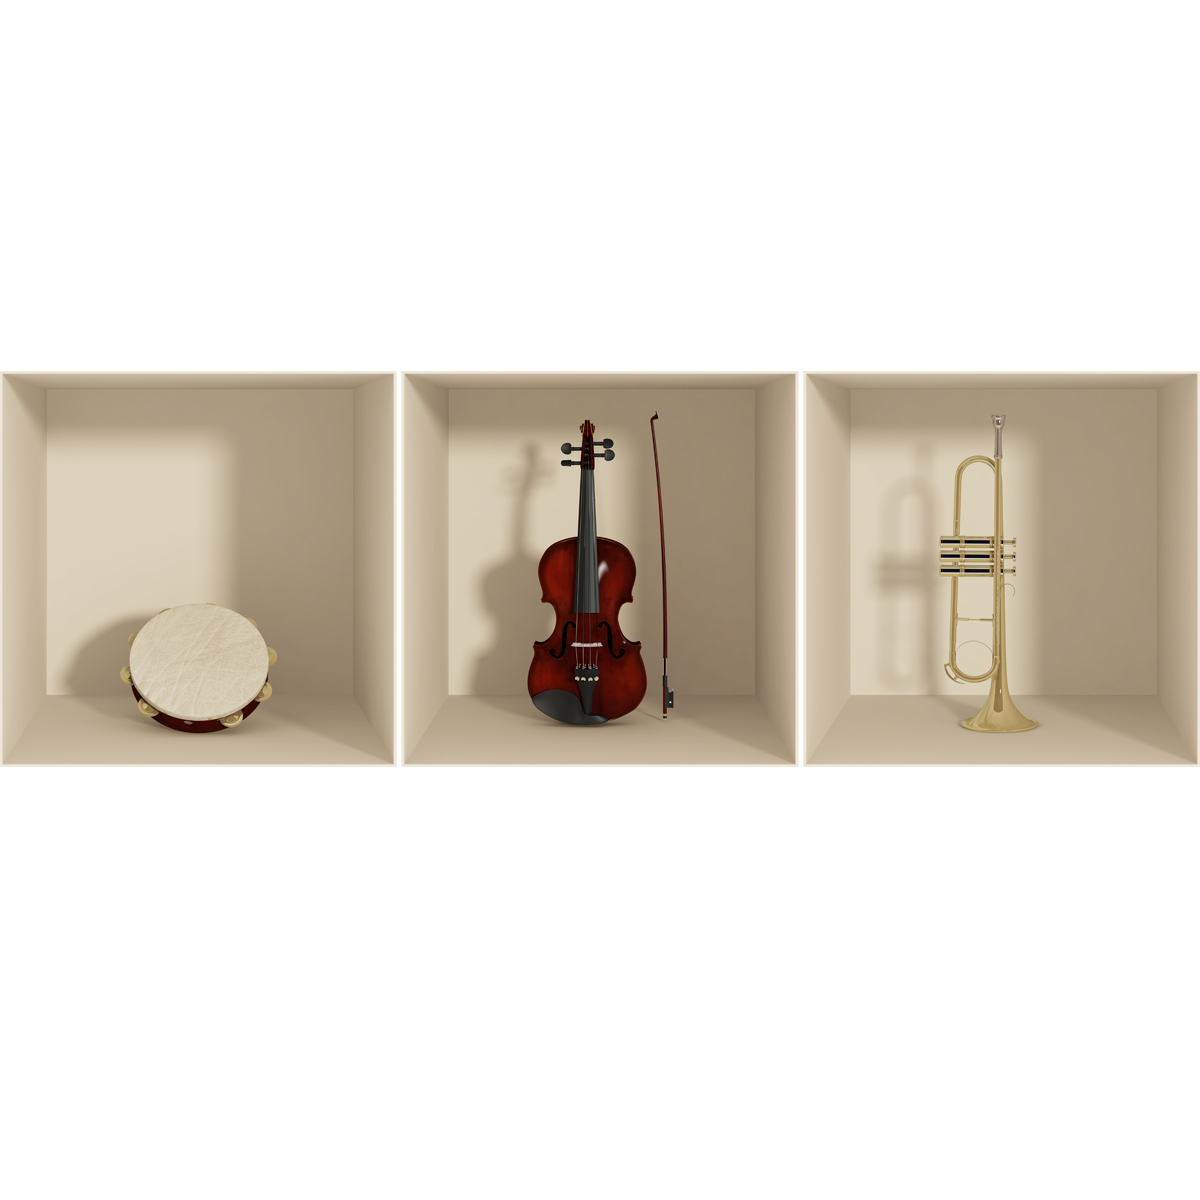 Wall decal 3D Musical Instruments